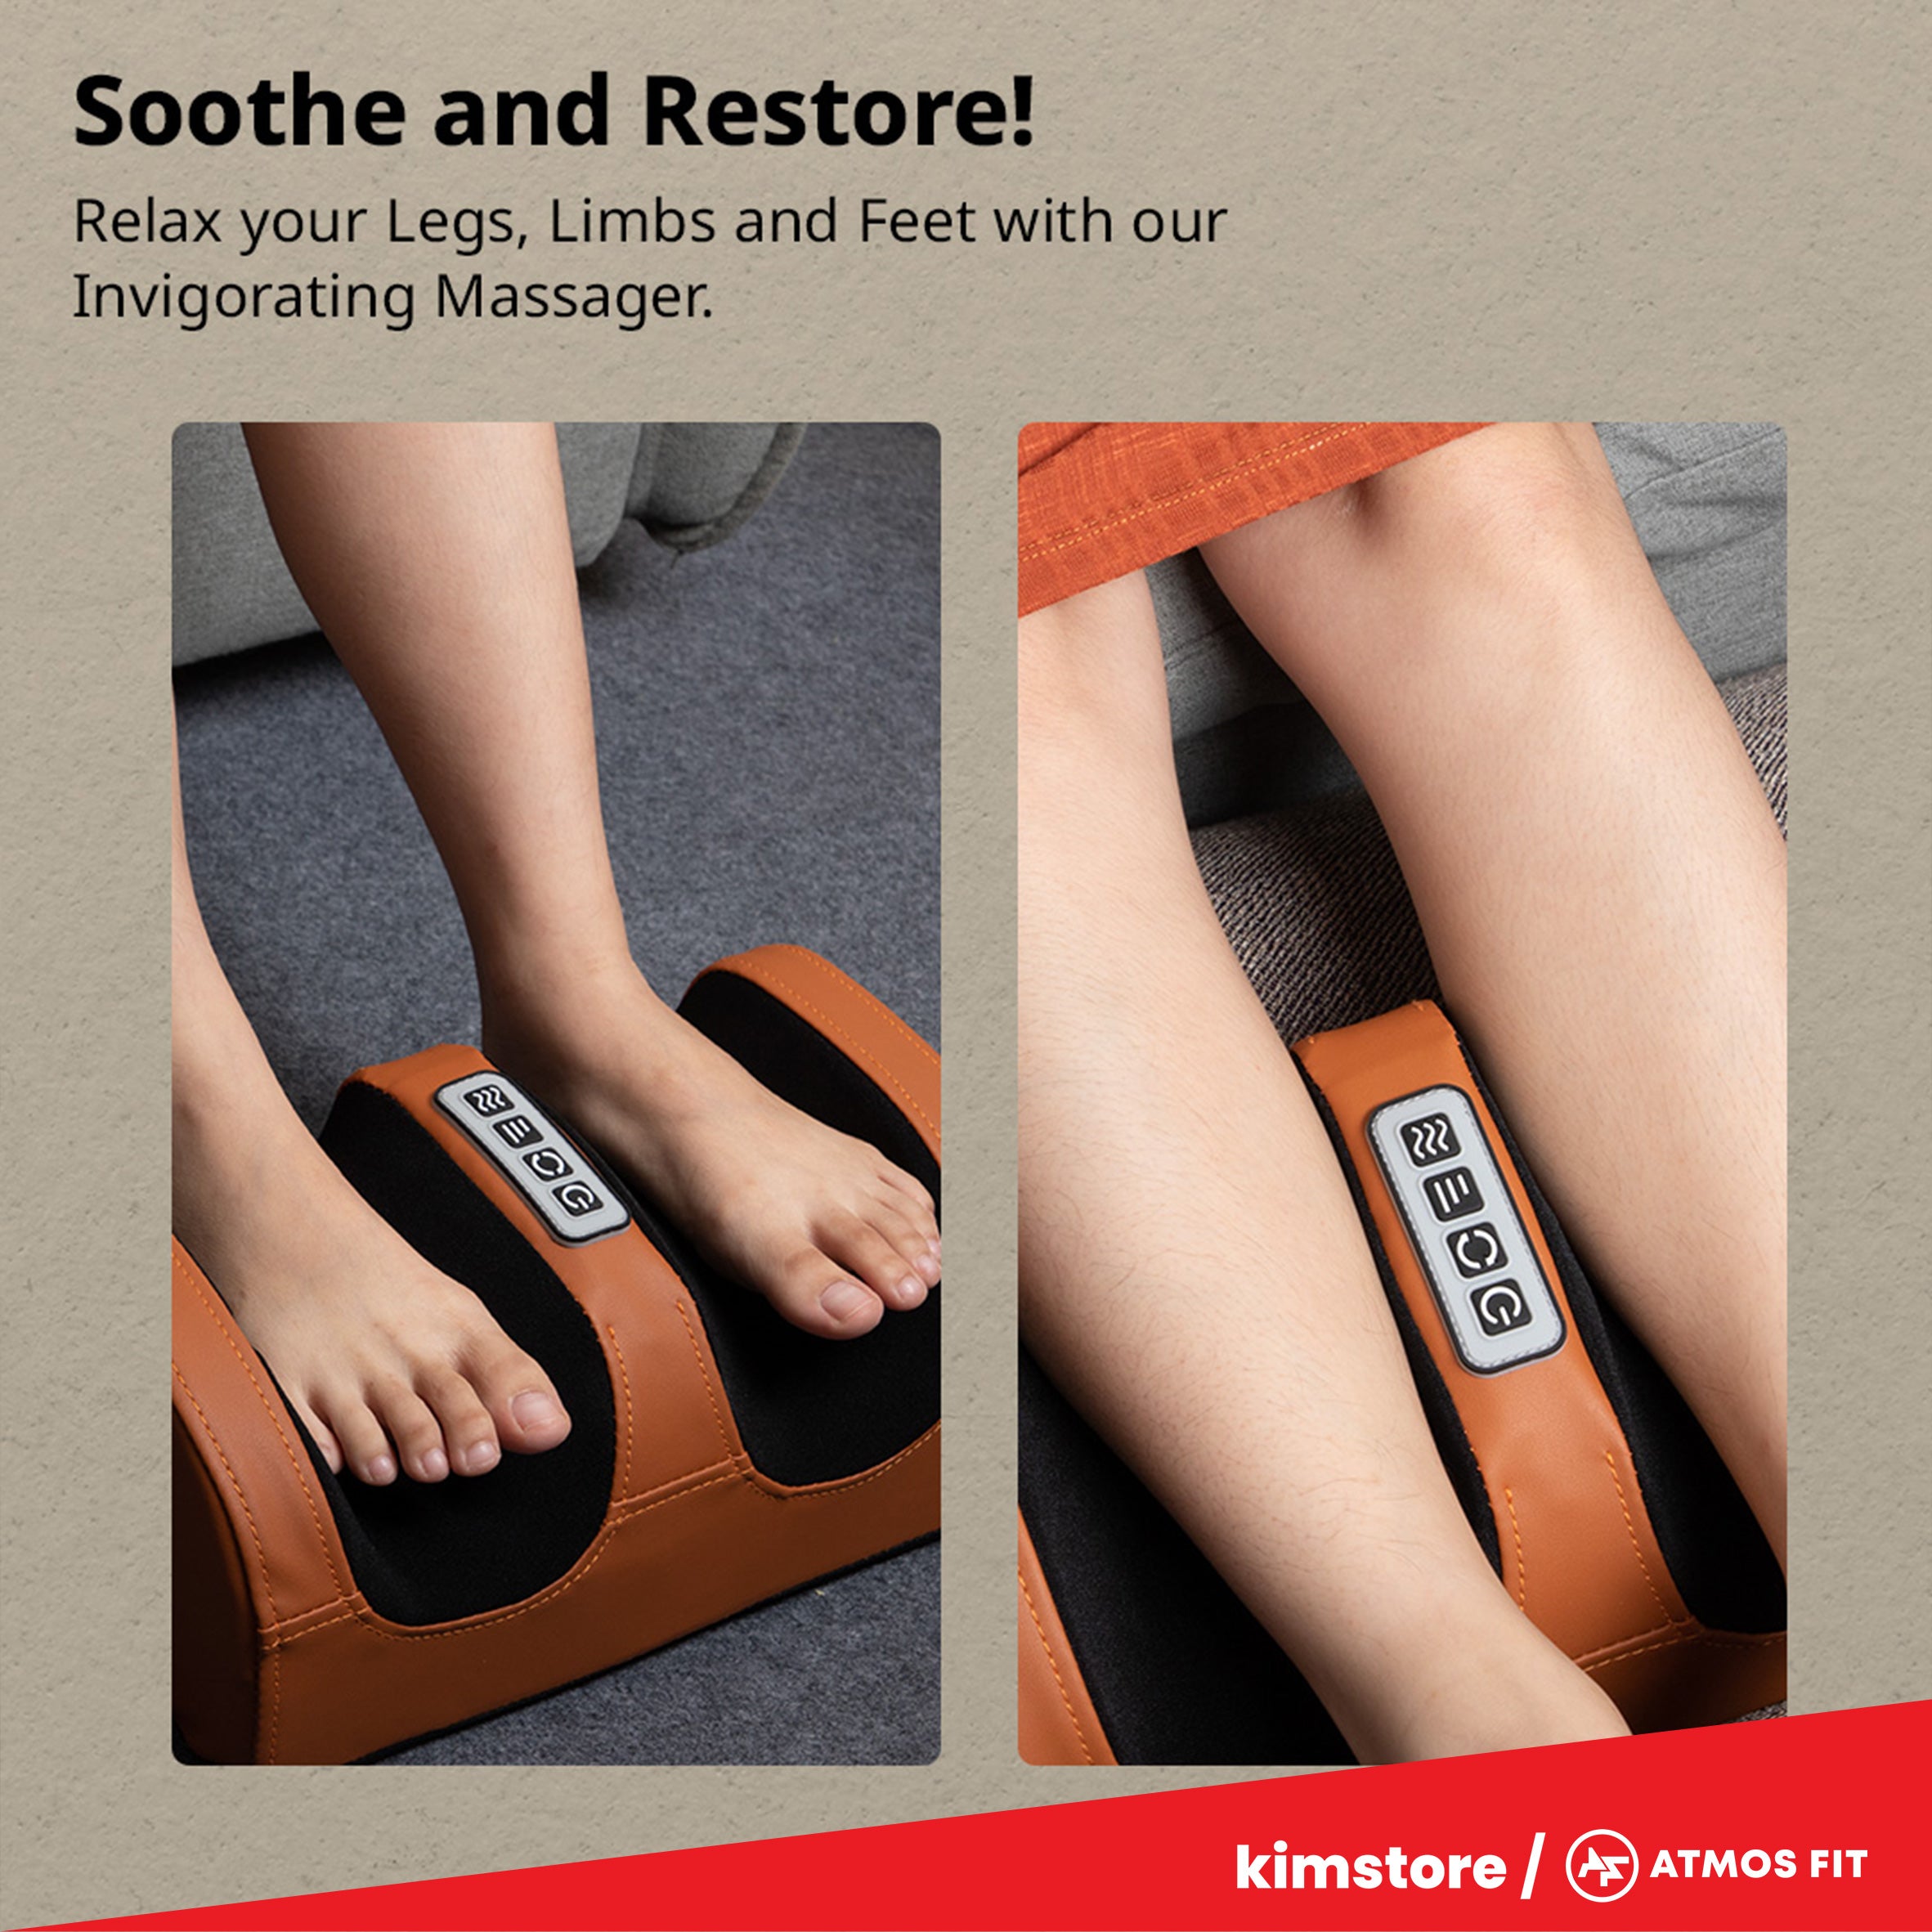 Atmos Fit Soothing Legs, Limbs and Feet Massager